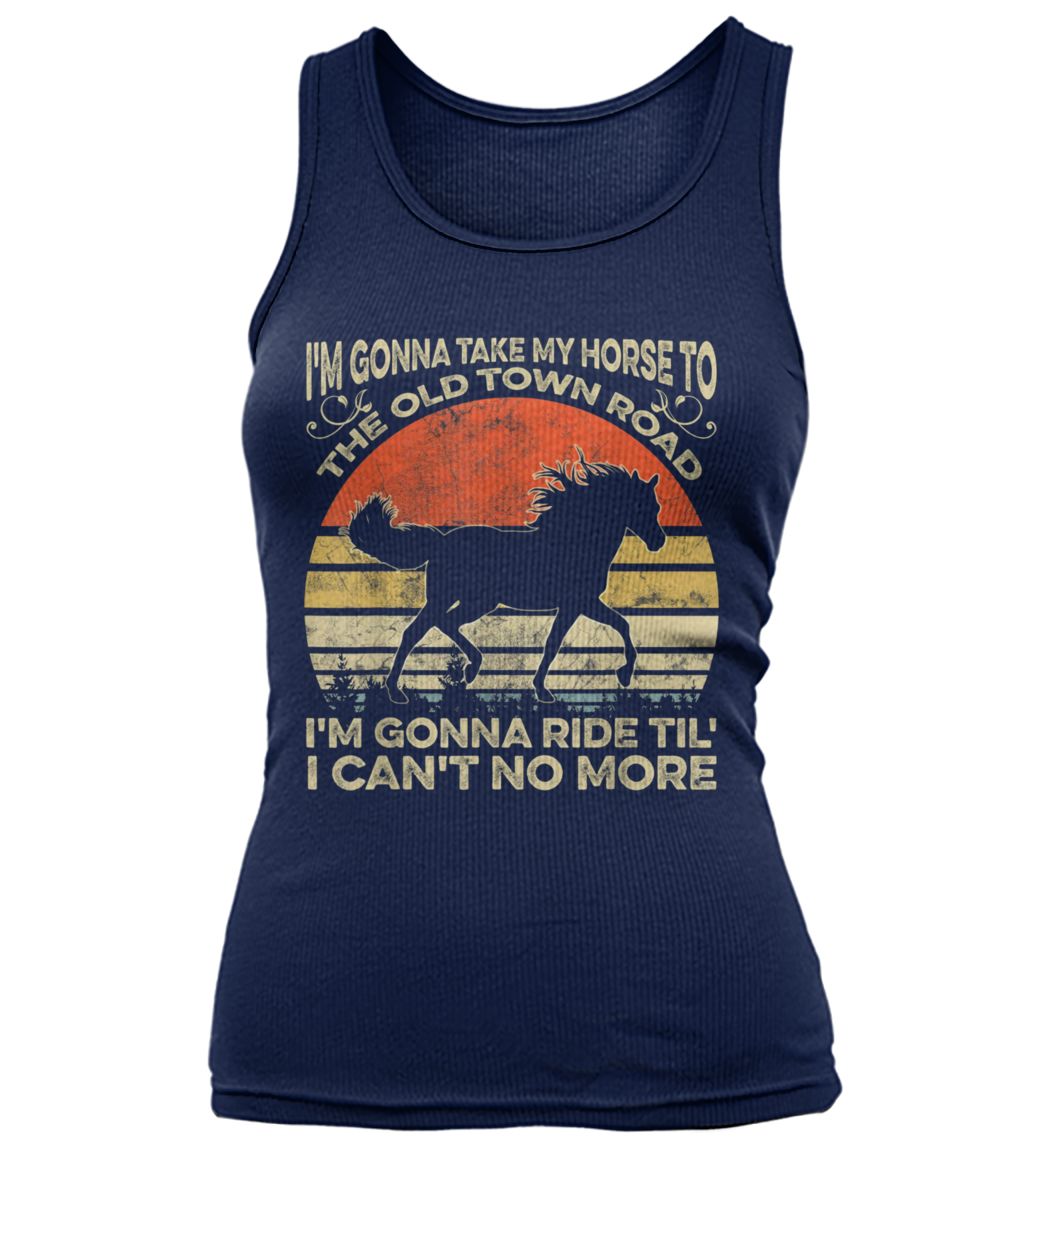 Vintage I'm gonna take my horse to the old town road women's tank top